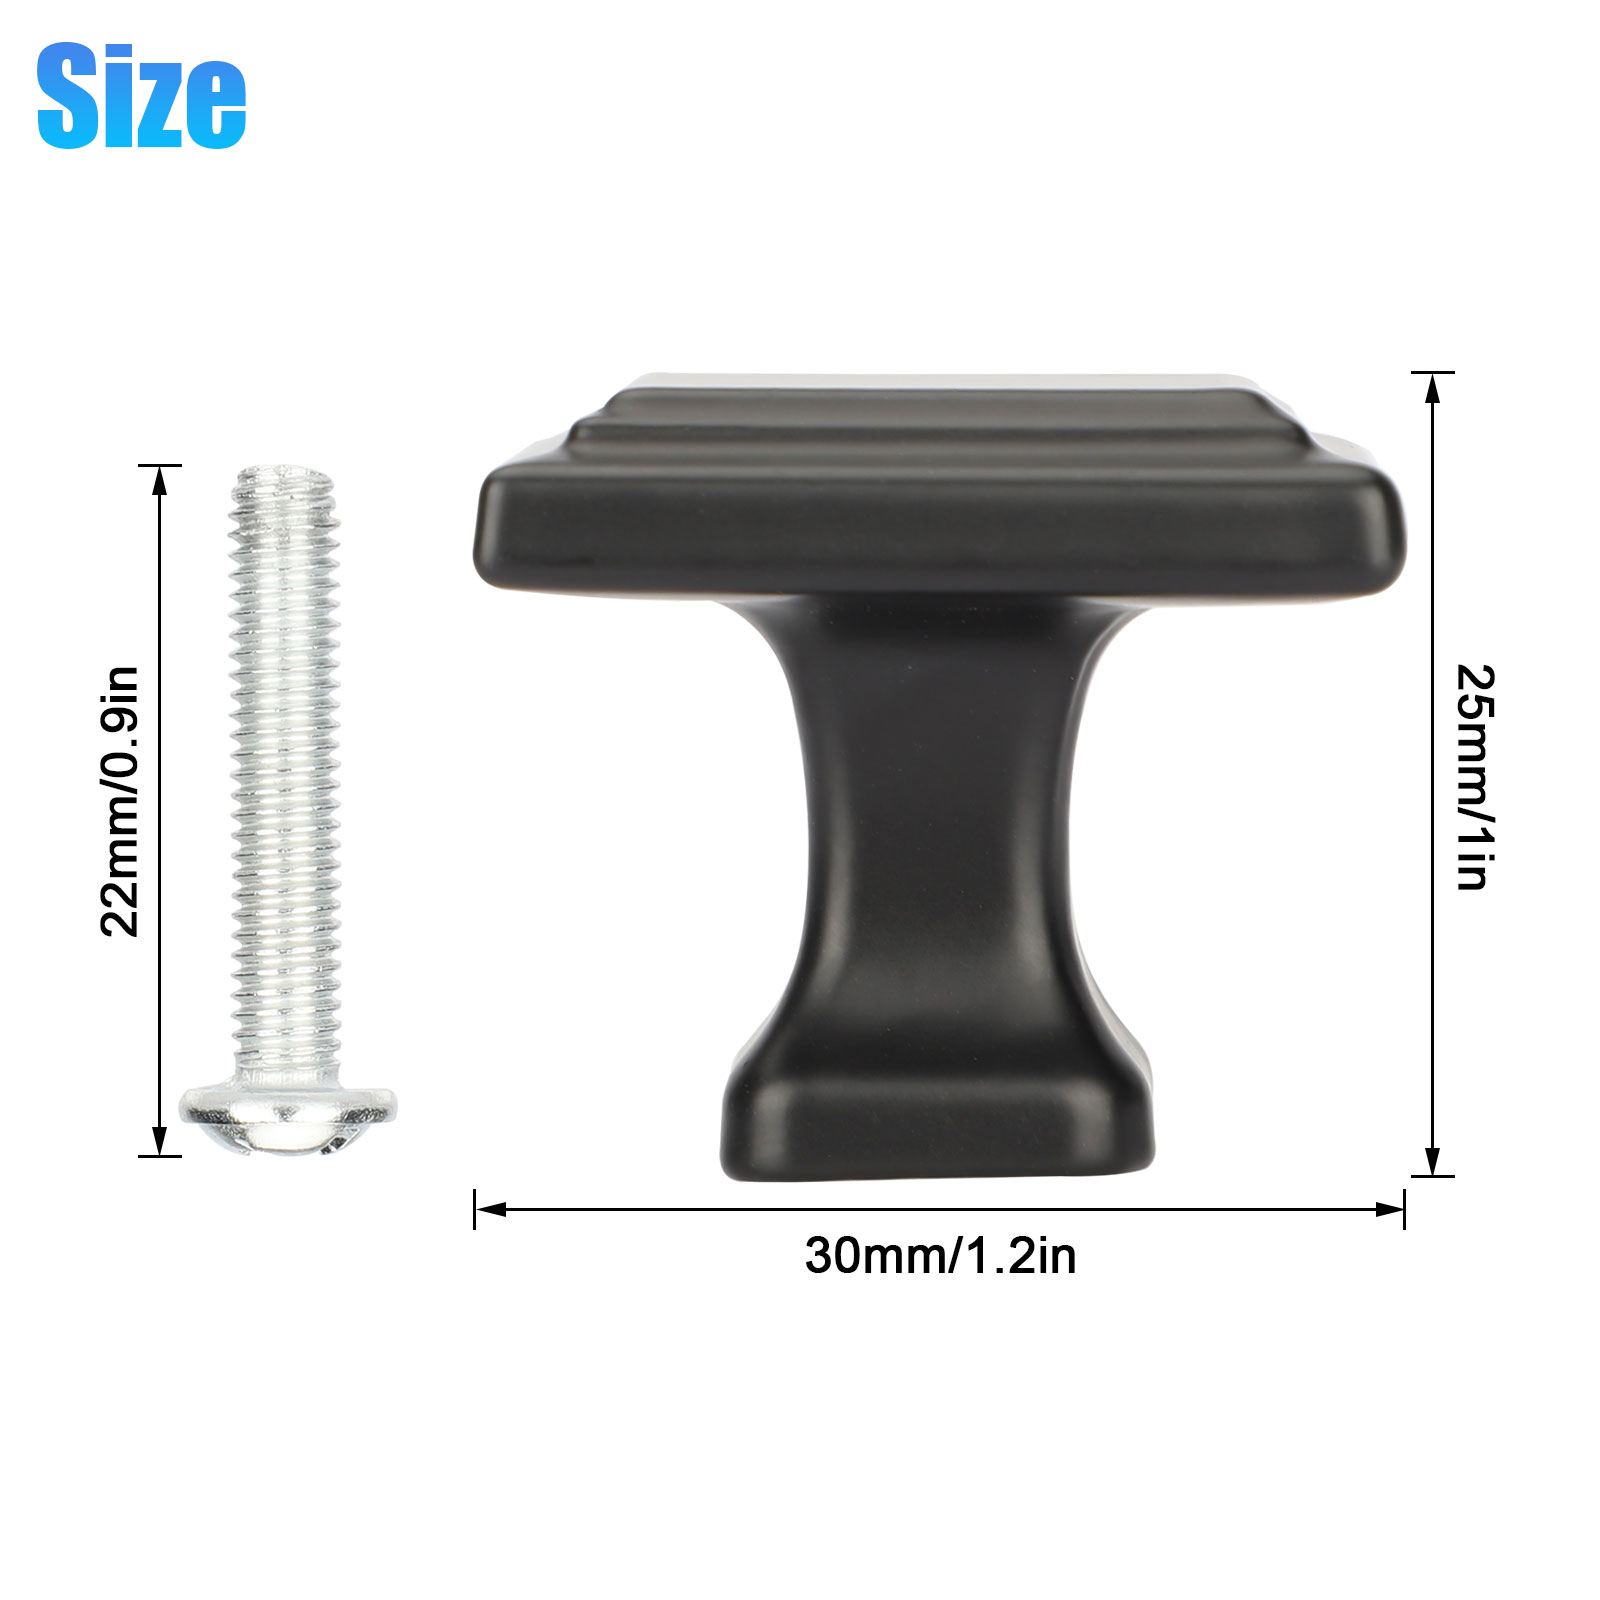 10 Pcs Square Cabinet Knob, TSV Black Pull Handle Drawer Knobs (1.2''), with Fitting Screws, Easy to Install, for Kitchen Cupboard Door, Bedroom Dresser Drawer, Bathroom Wardrobe Hardware - image 2 of 9